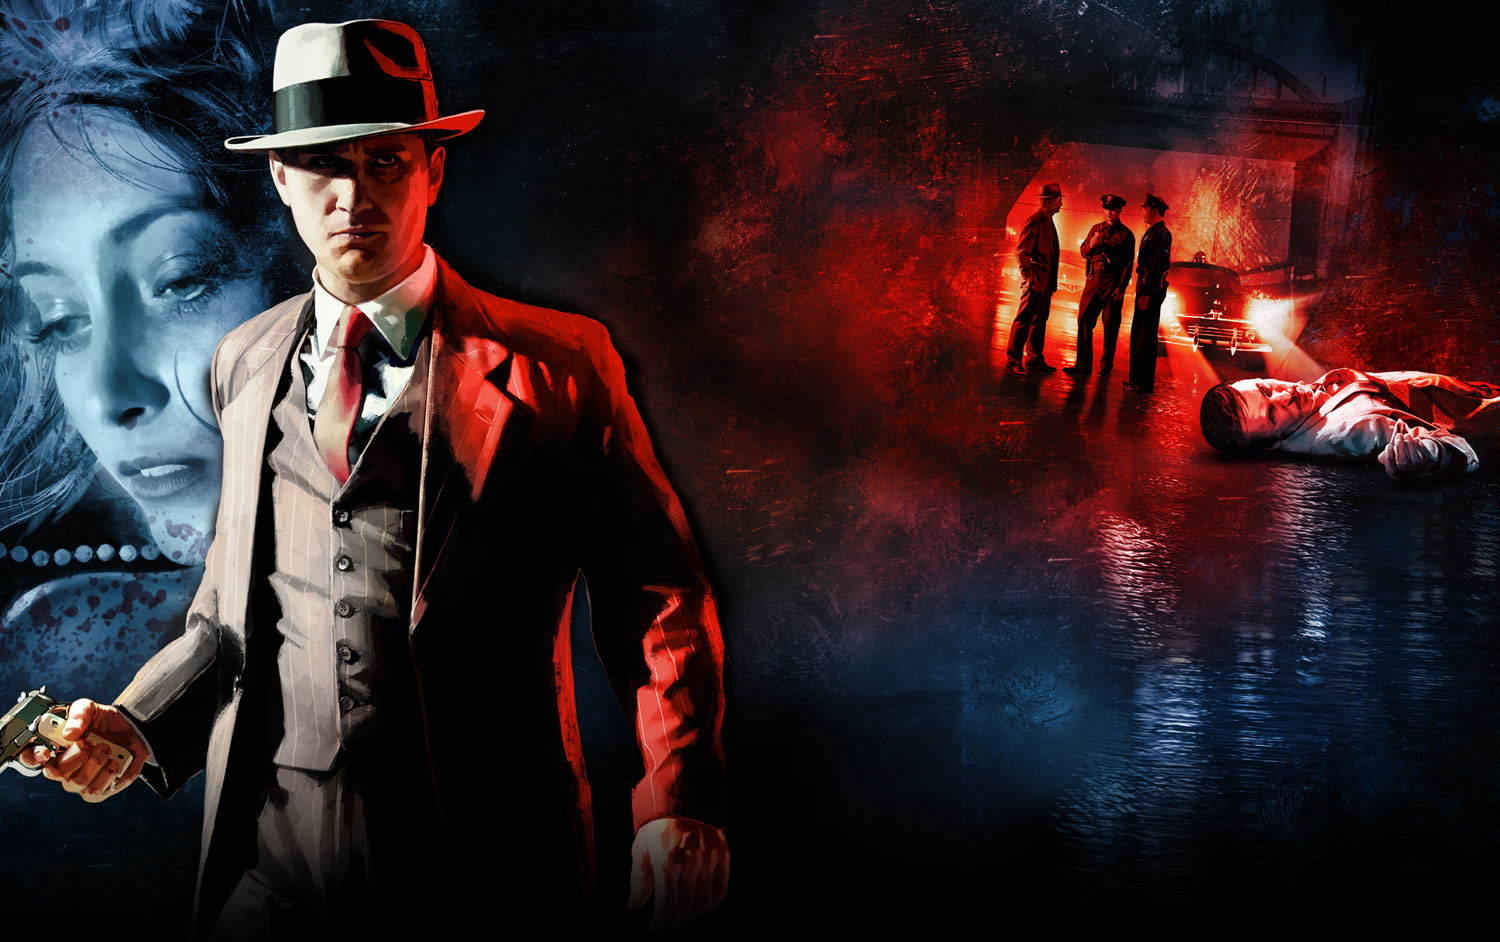 la noire wallpaper,movie,games,darkness,fictional character,performance